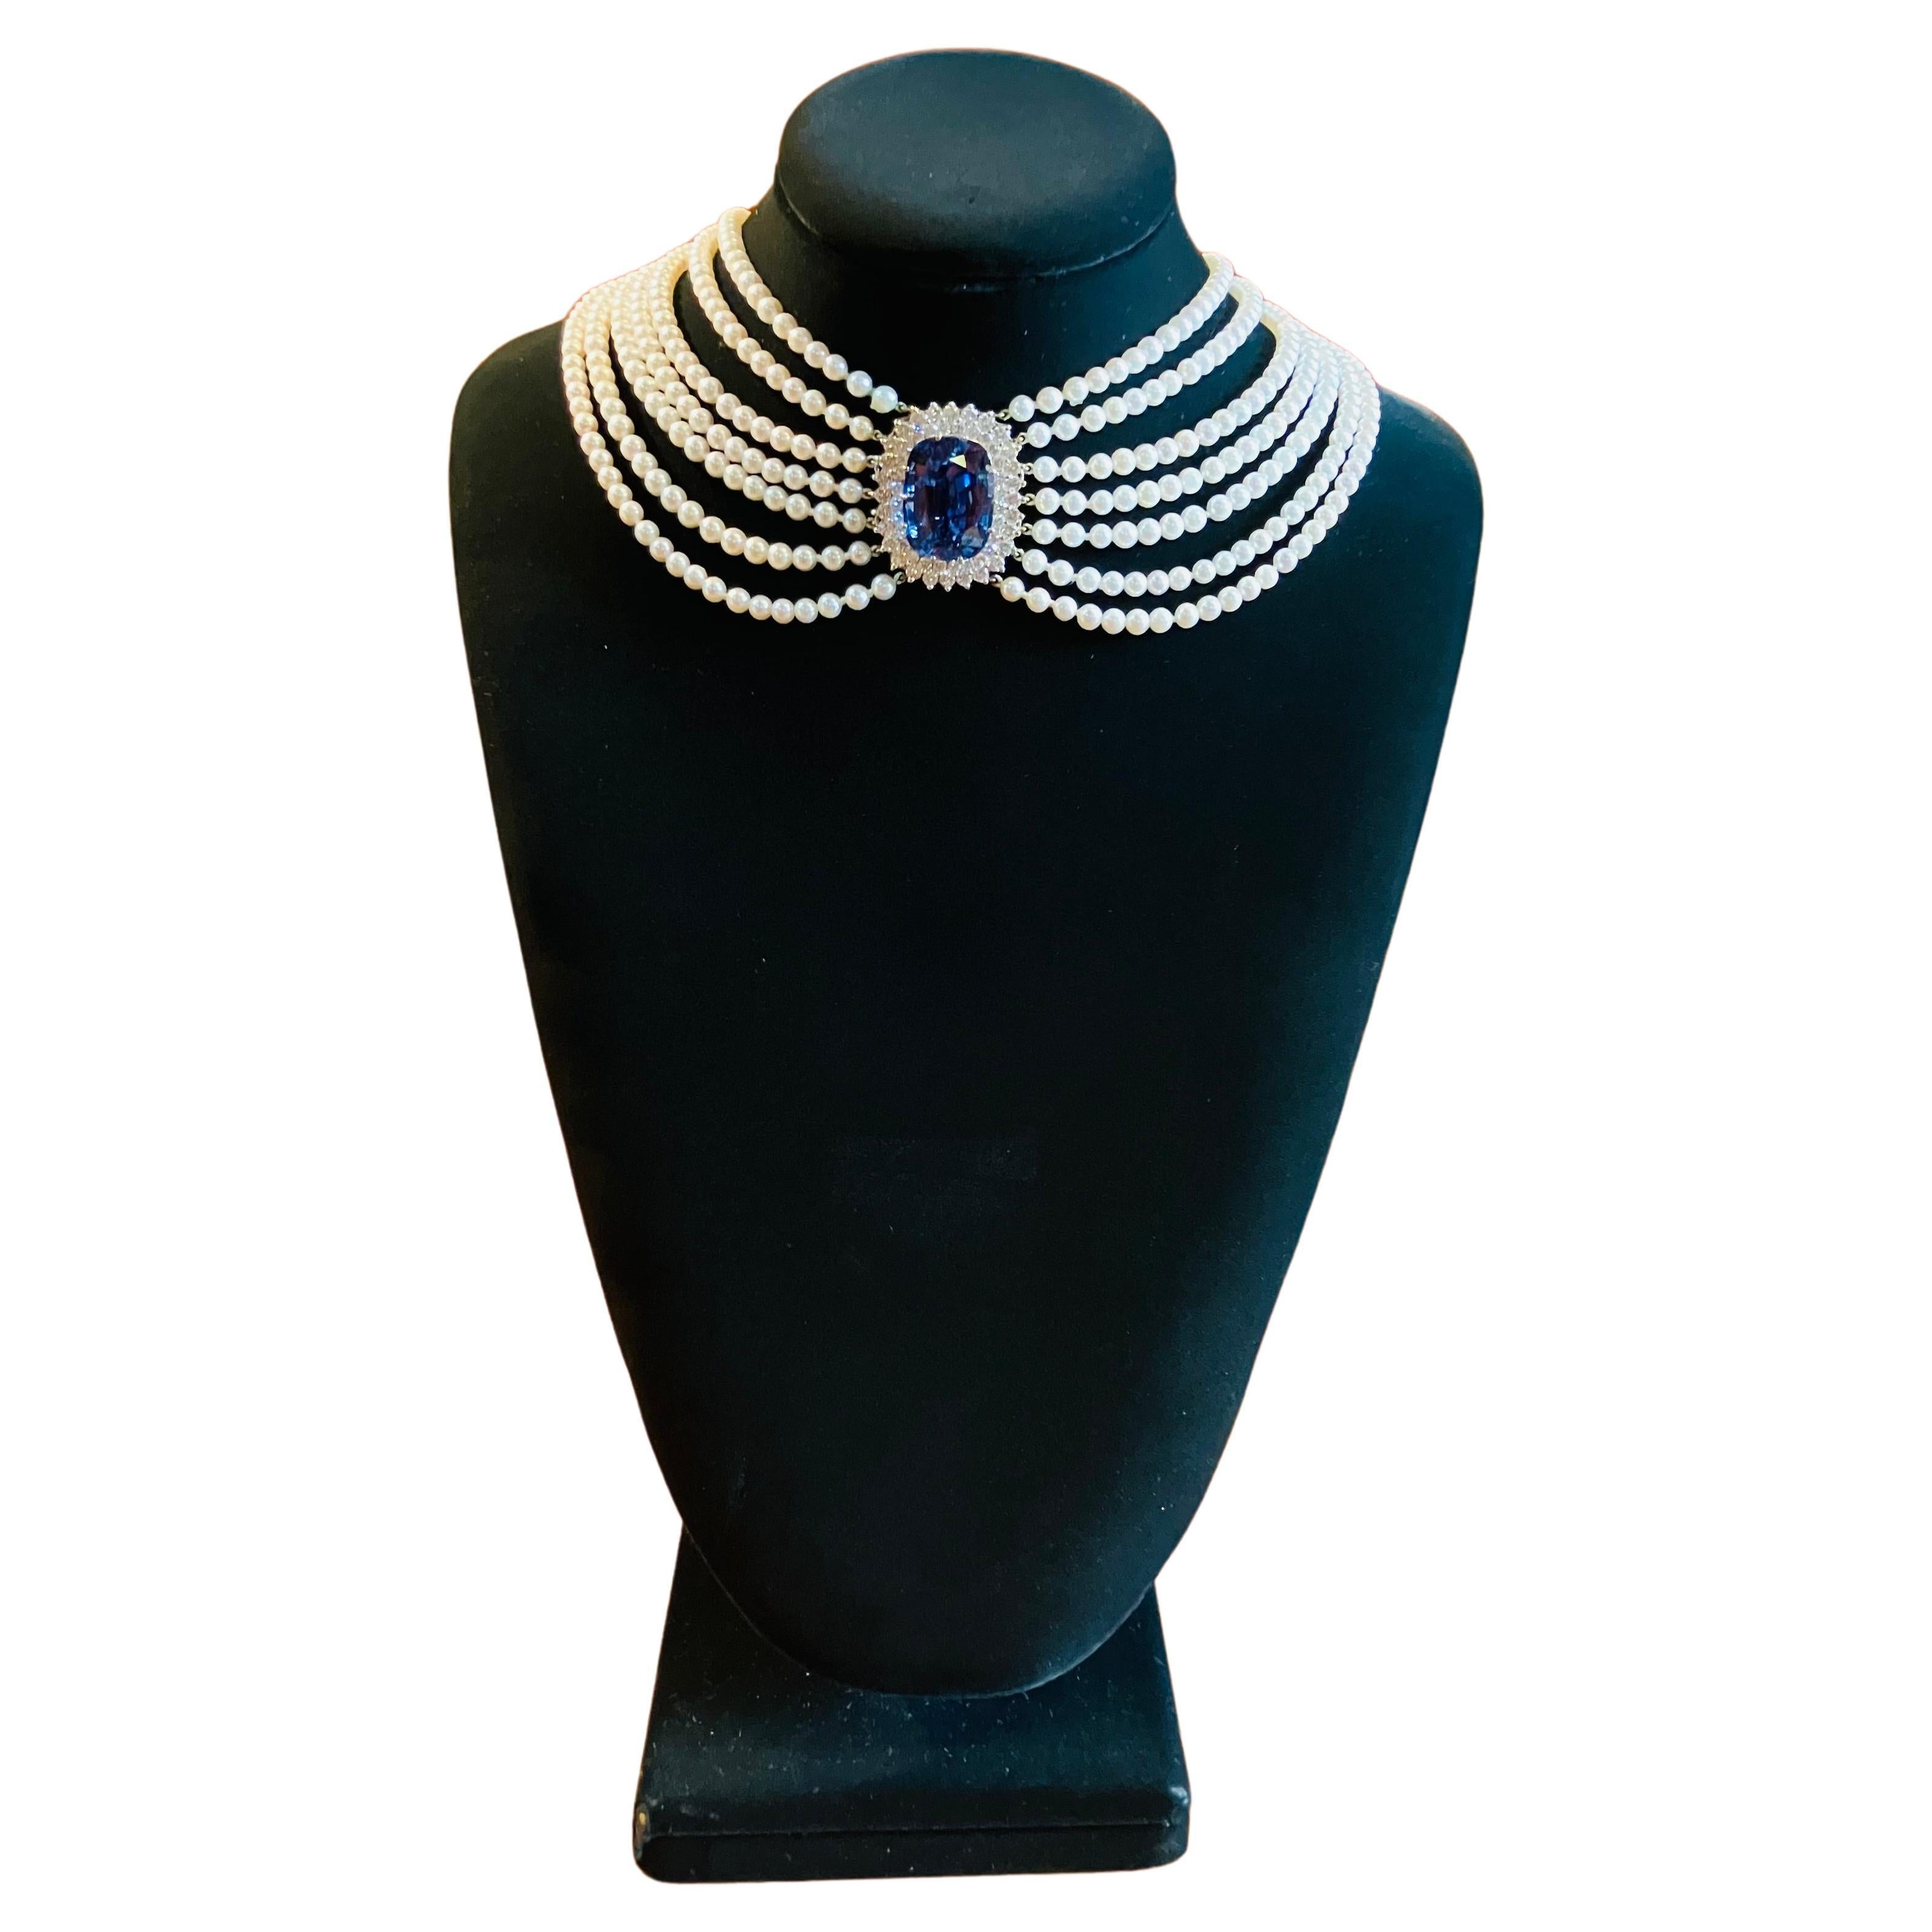 Here is your opportunity To Own A- One-Of-A-Kind  Magnificent Choker Necklace, Approximately 45 carat Sapphire in the Center with 5 carats of Diamonds.  

*Price is only for 1stDibs Collaboration